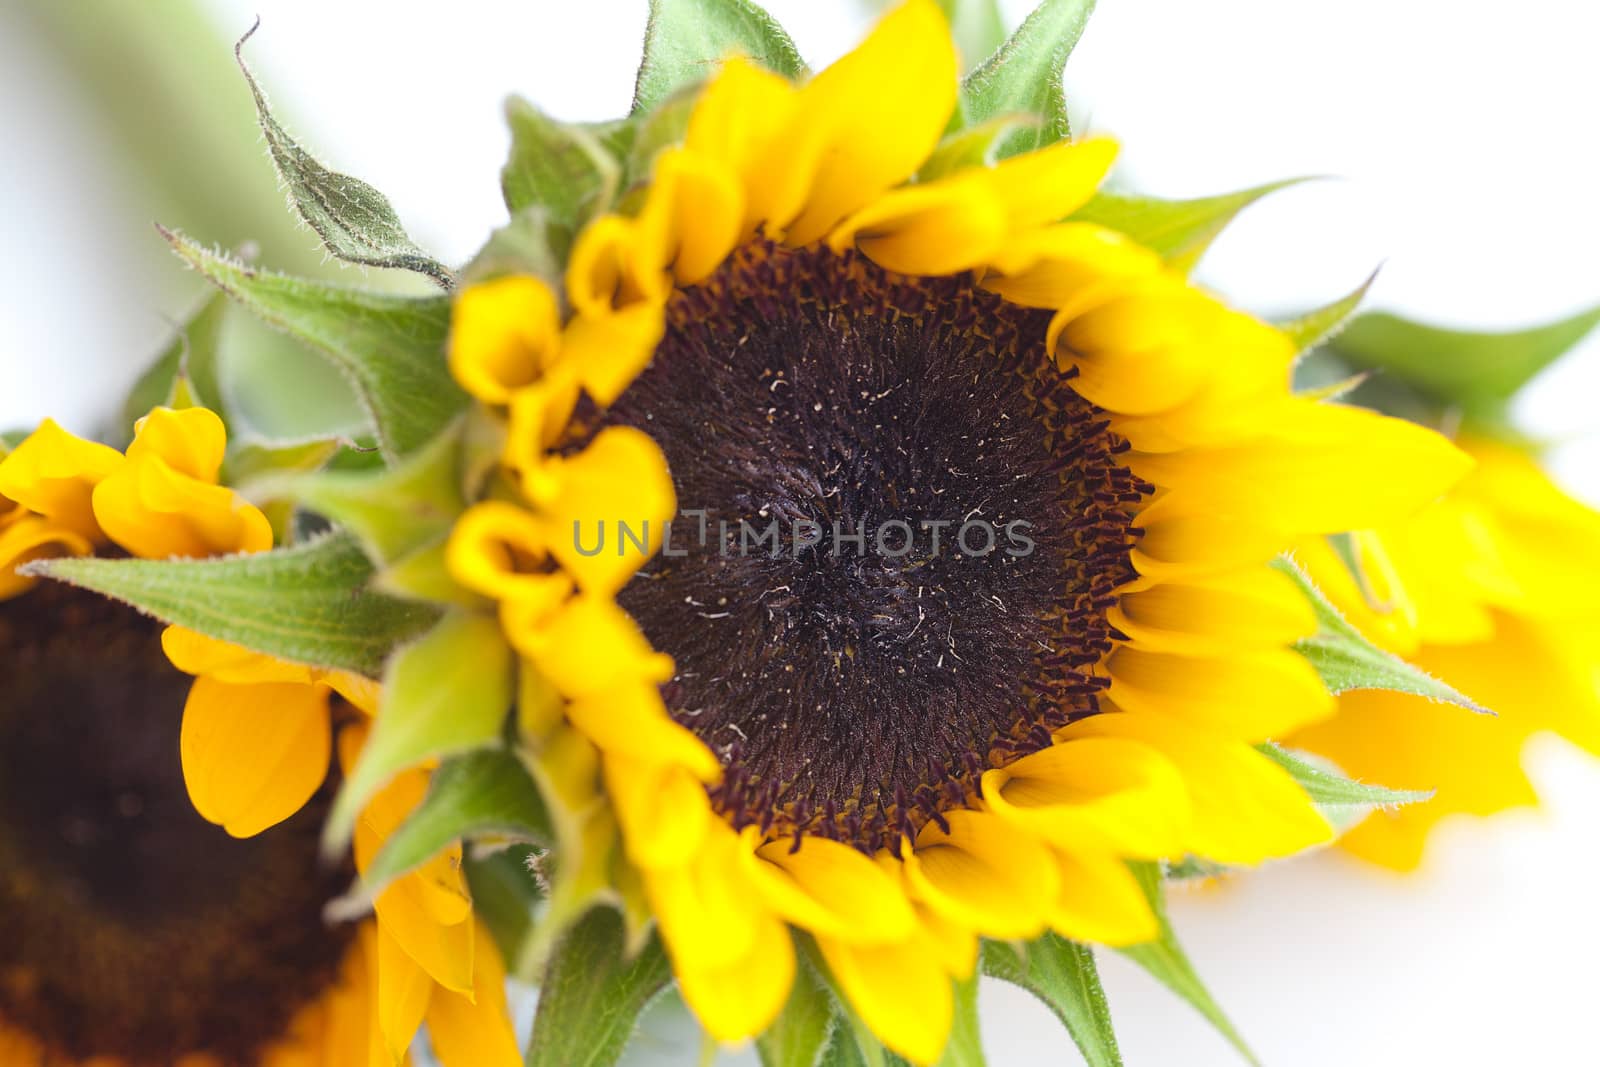 bouquet of three sunflowers isolated on white